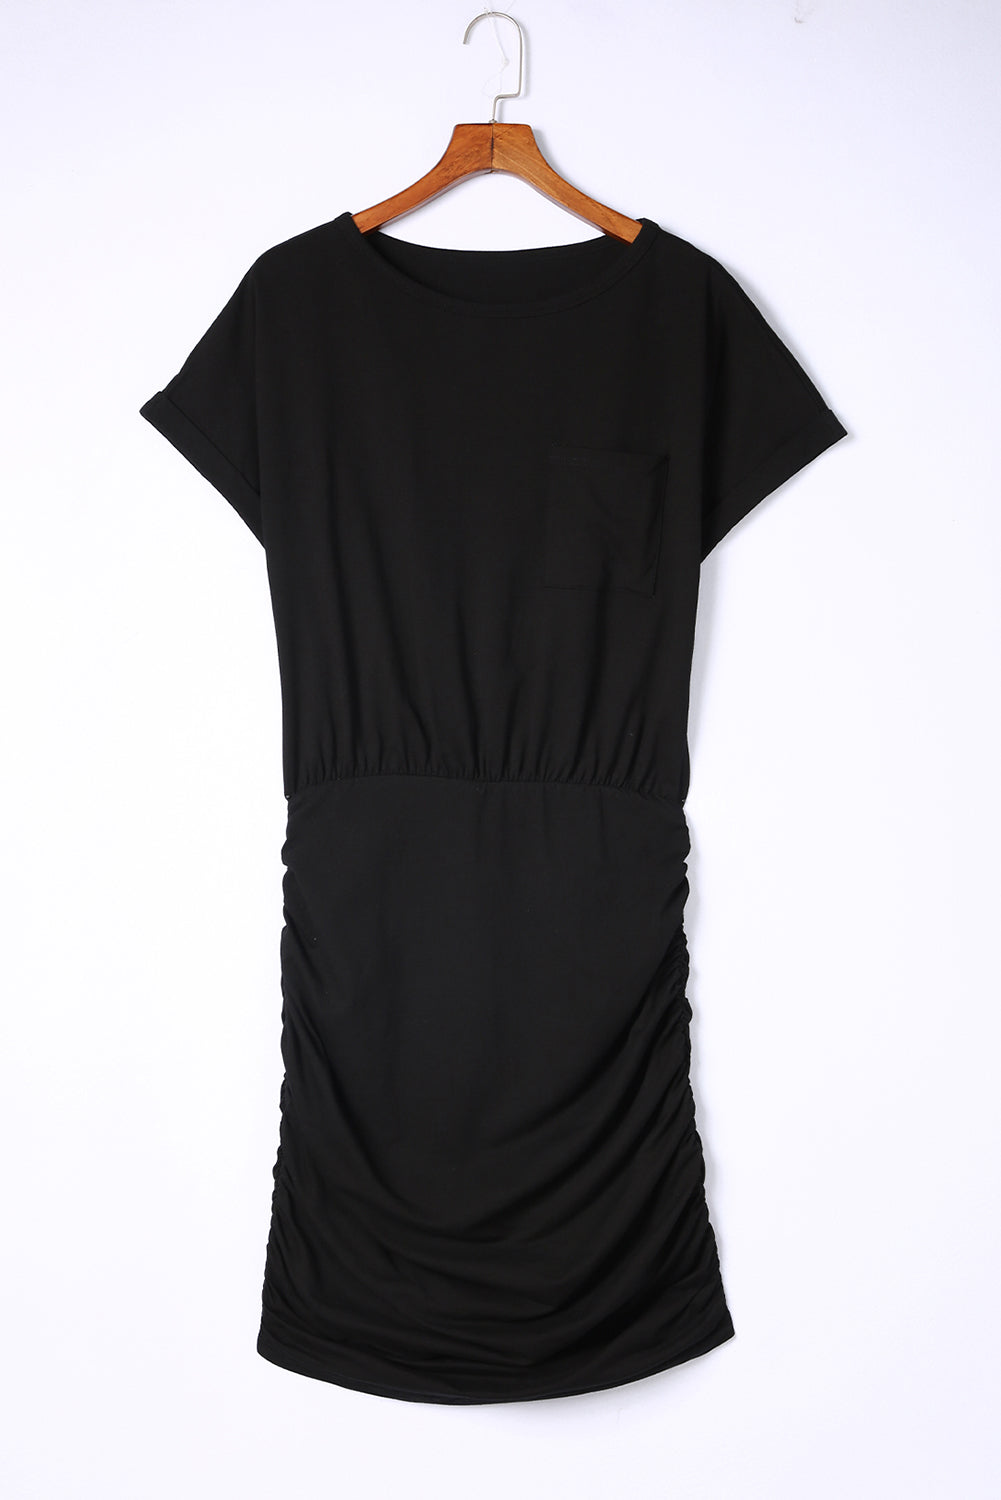 Black Chest Pocket Loose T-shirt Ruched Bodycon Mini Dress